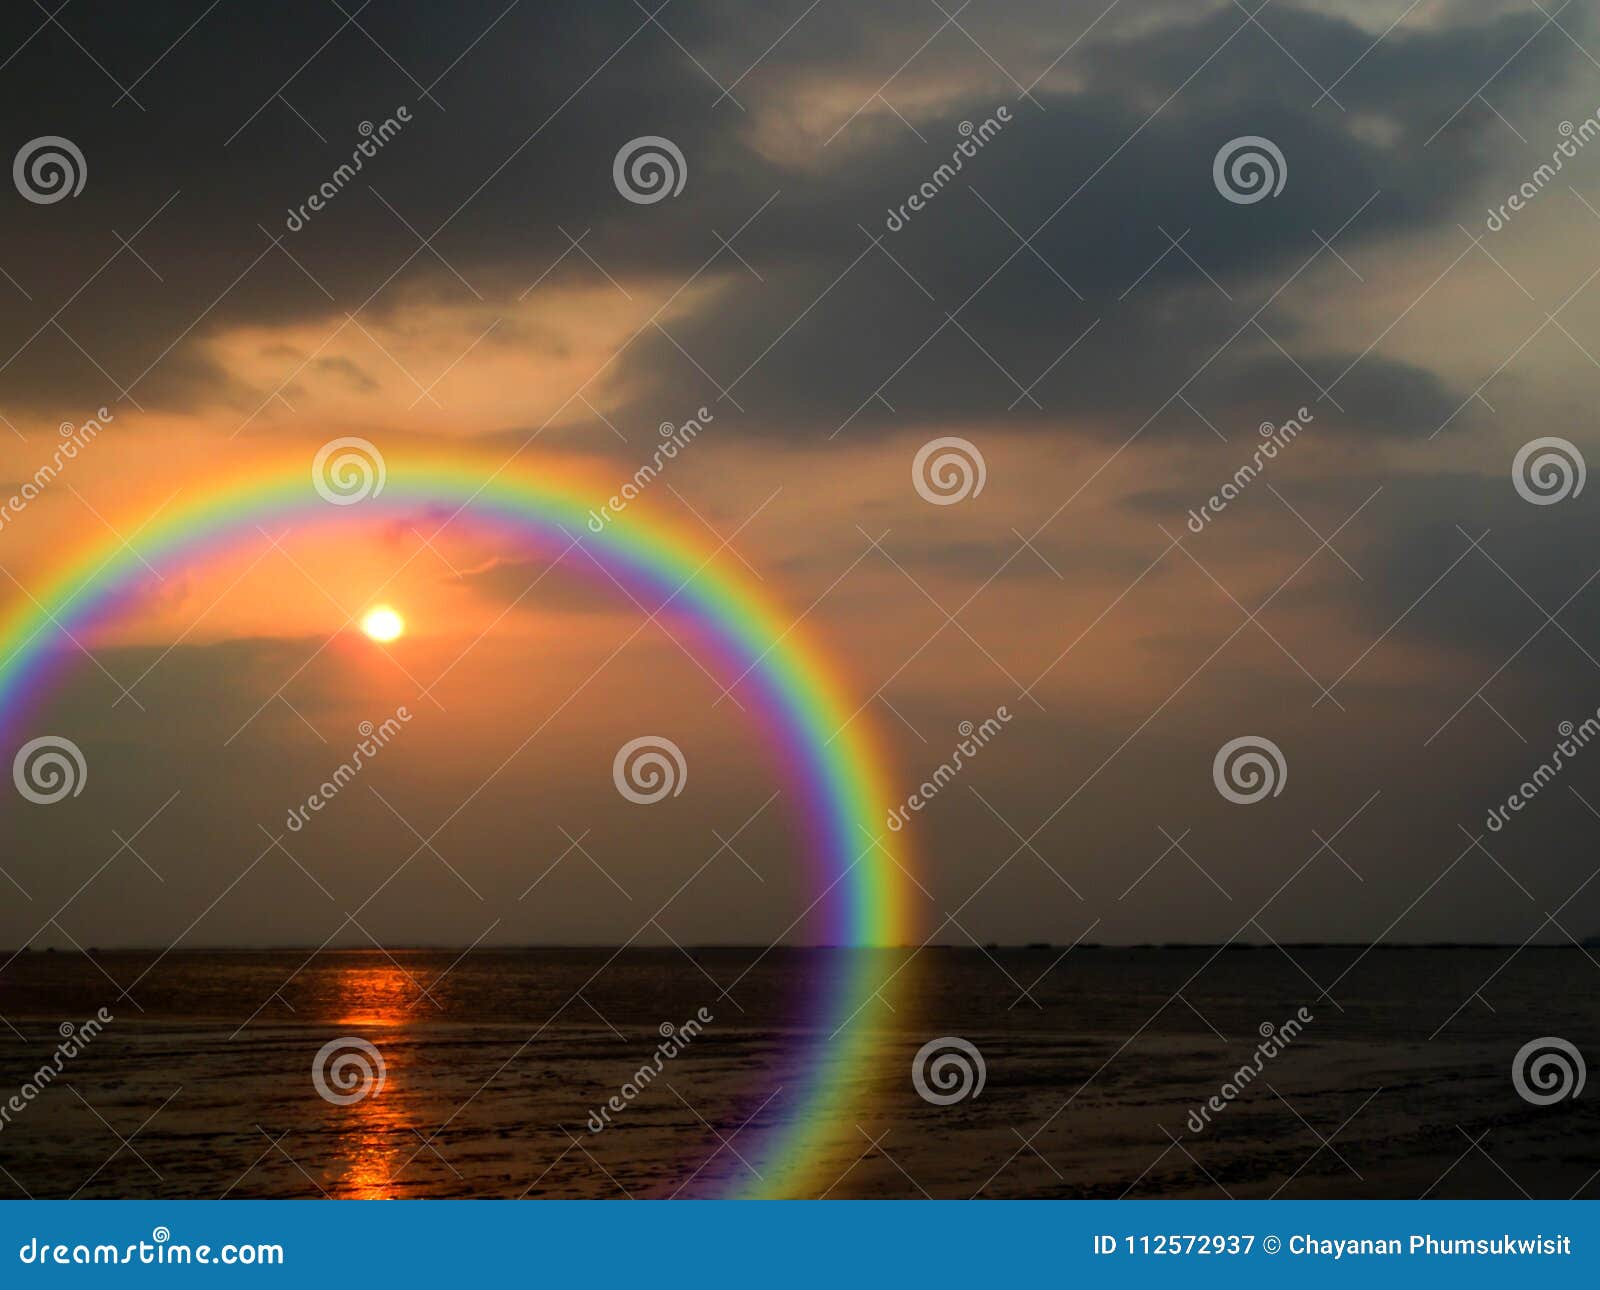 rainbow and reflection spread cloud of sunset